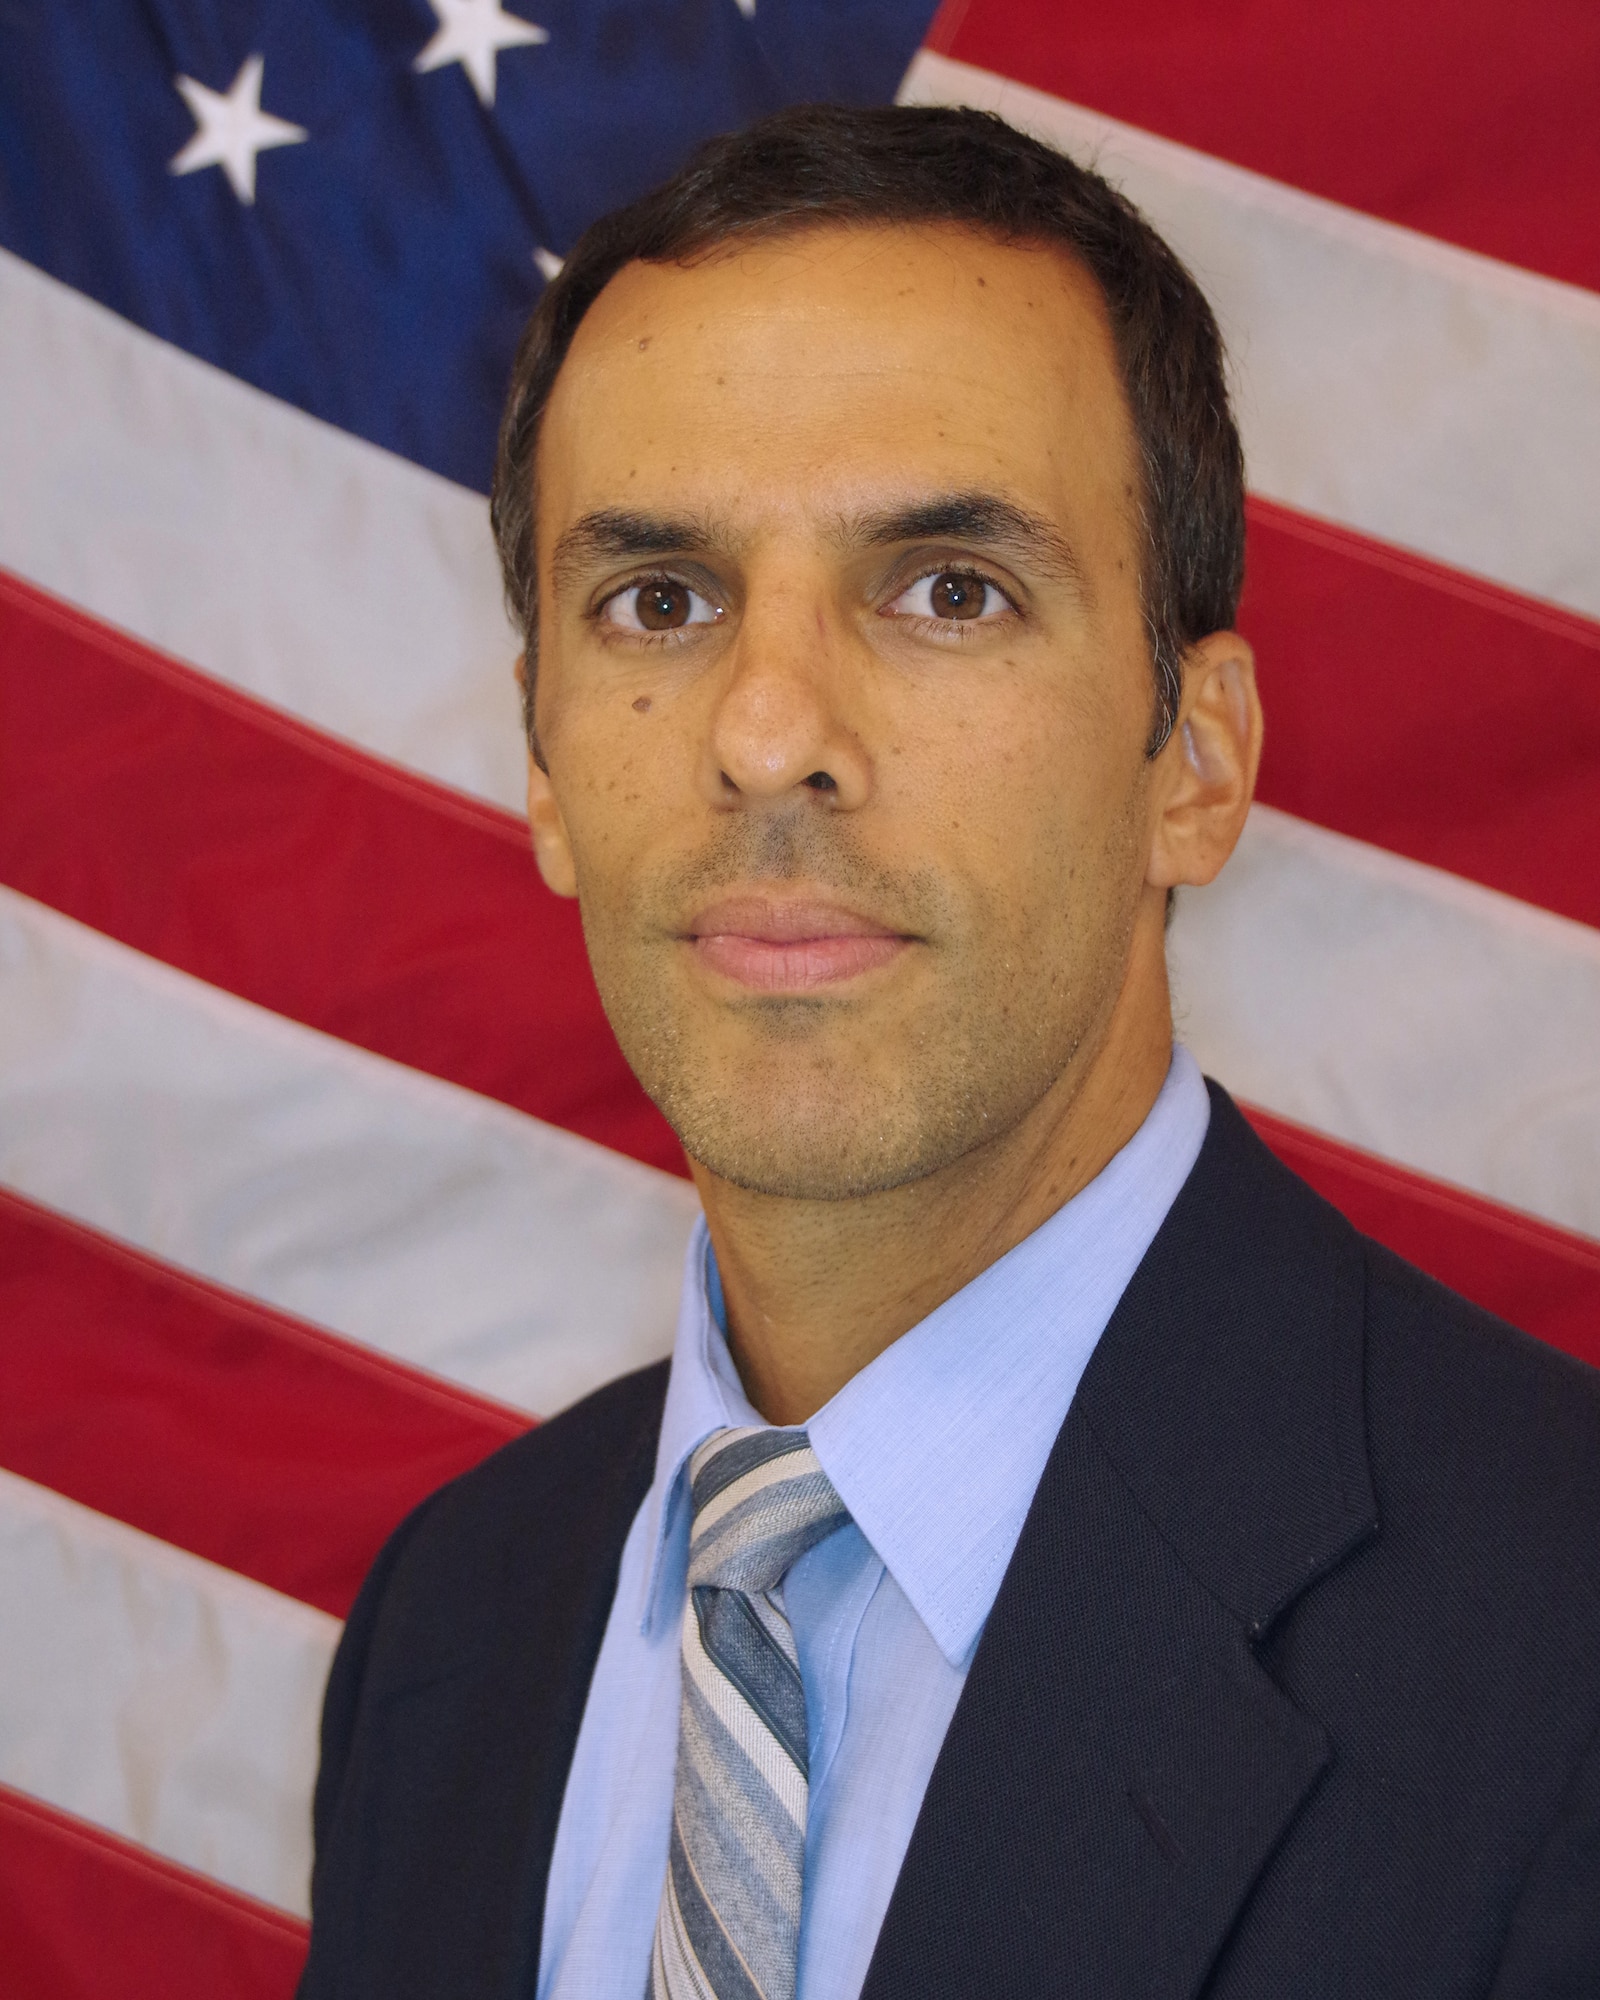 The Department of Defense Education Activity (DoDEA) Americas region proudly announces that Paul Hernandez, the Maxwell Elementary-Middle School principal in Alabama, as the 2019 DoDEA Americas Principal of the Year.